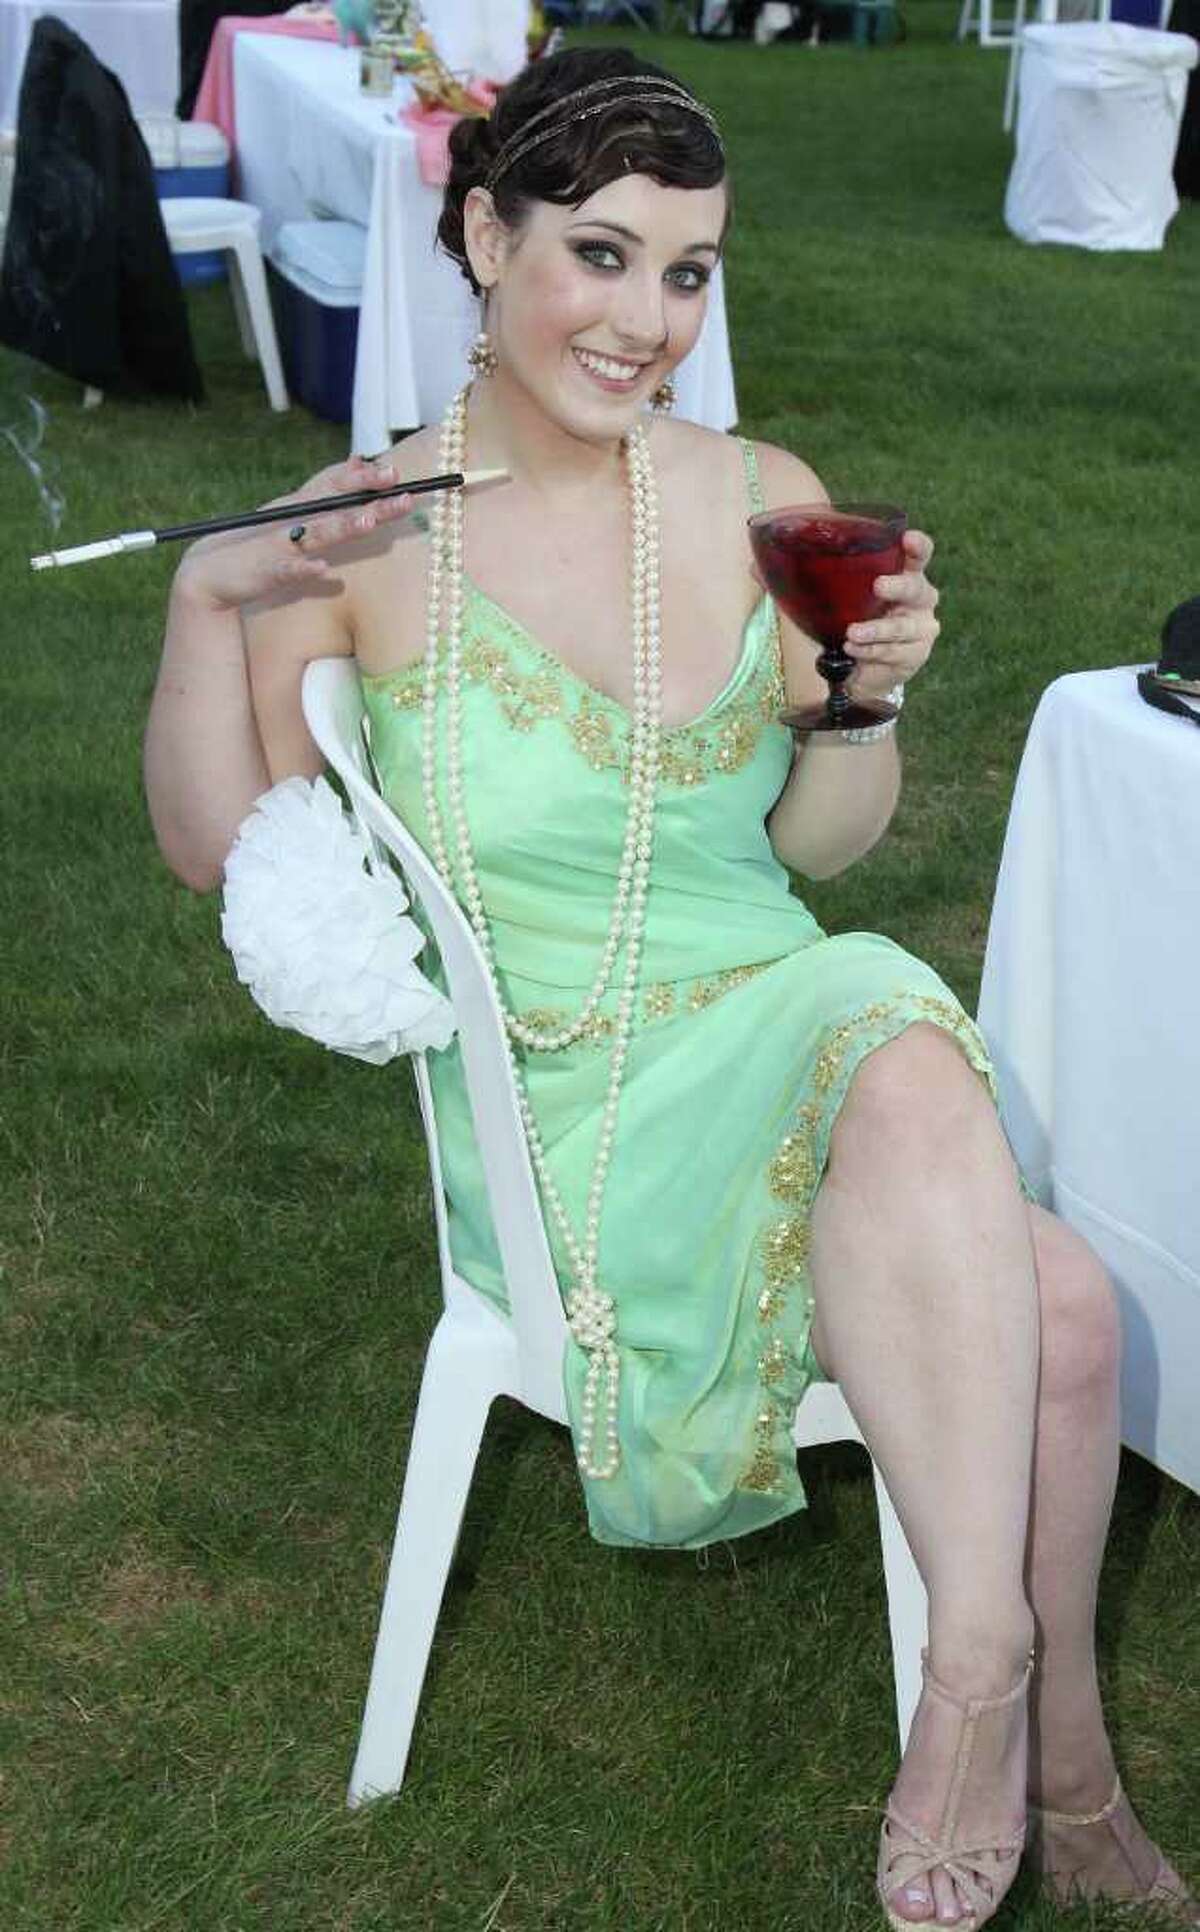 Saratoga Springs, NY - July 9, 2011 - (Photo by Joe Putrock/Special to the Times Union) - SPAC Junior Committee member Gwenn Patterson wore her best period attire to the SPAC Gala Lawn Party: A Gatsby Evening, hosted by SPAC's Junior Committee.